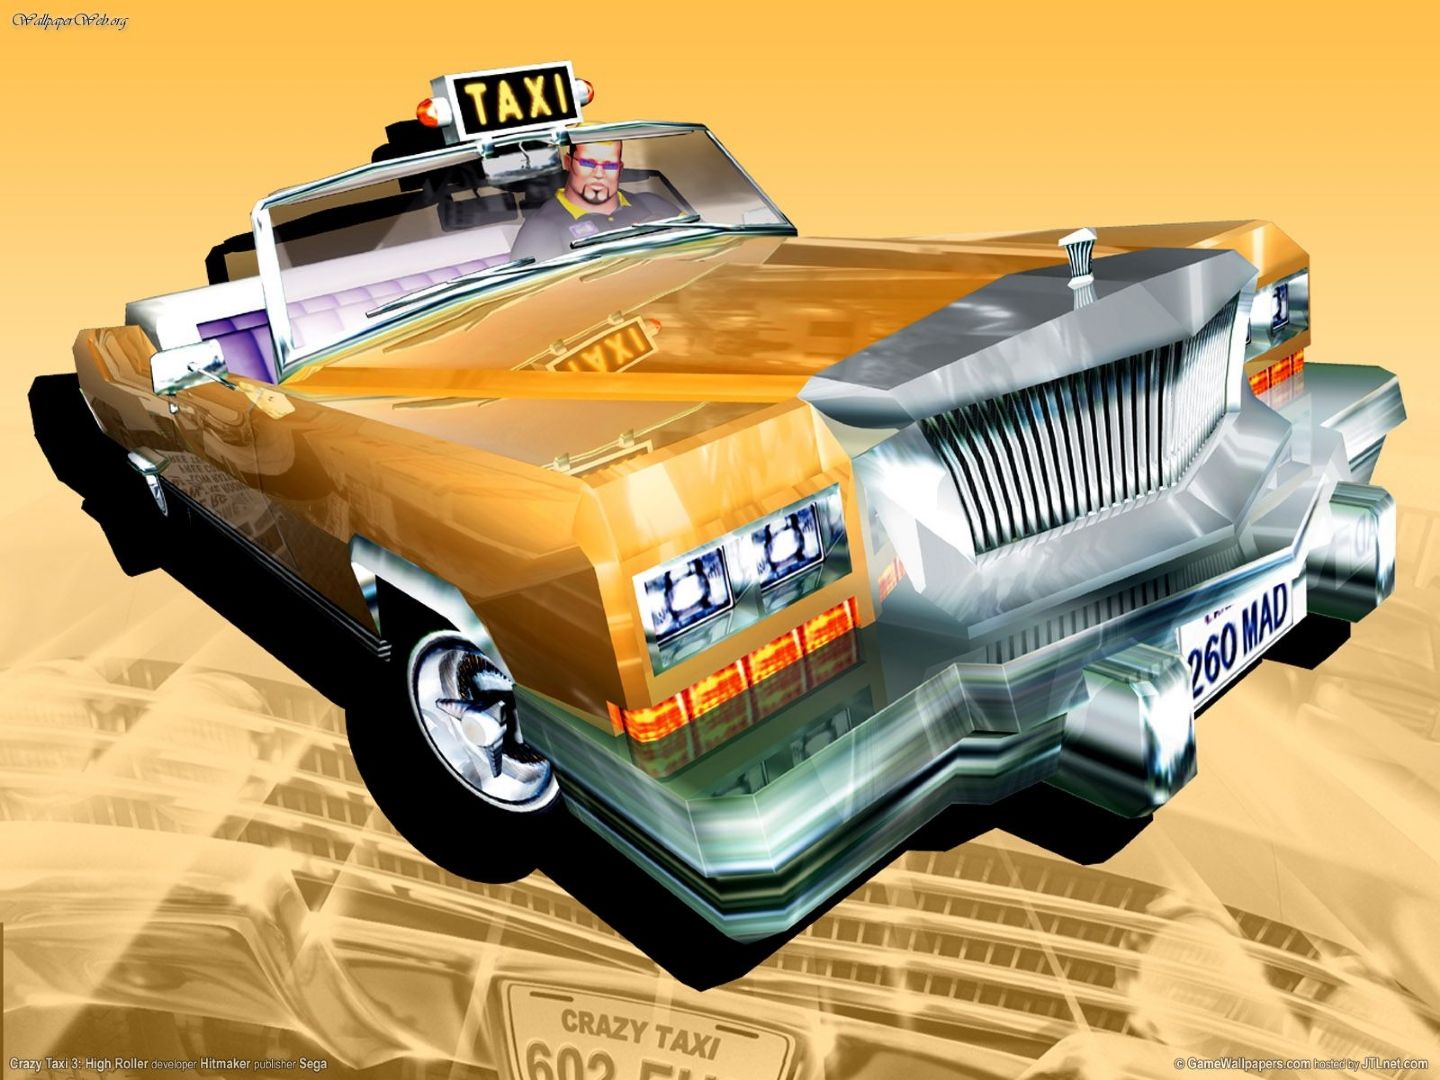 Games: Crazy Taxi 3: High Roller, picture nr. 29359